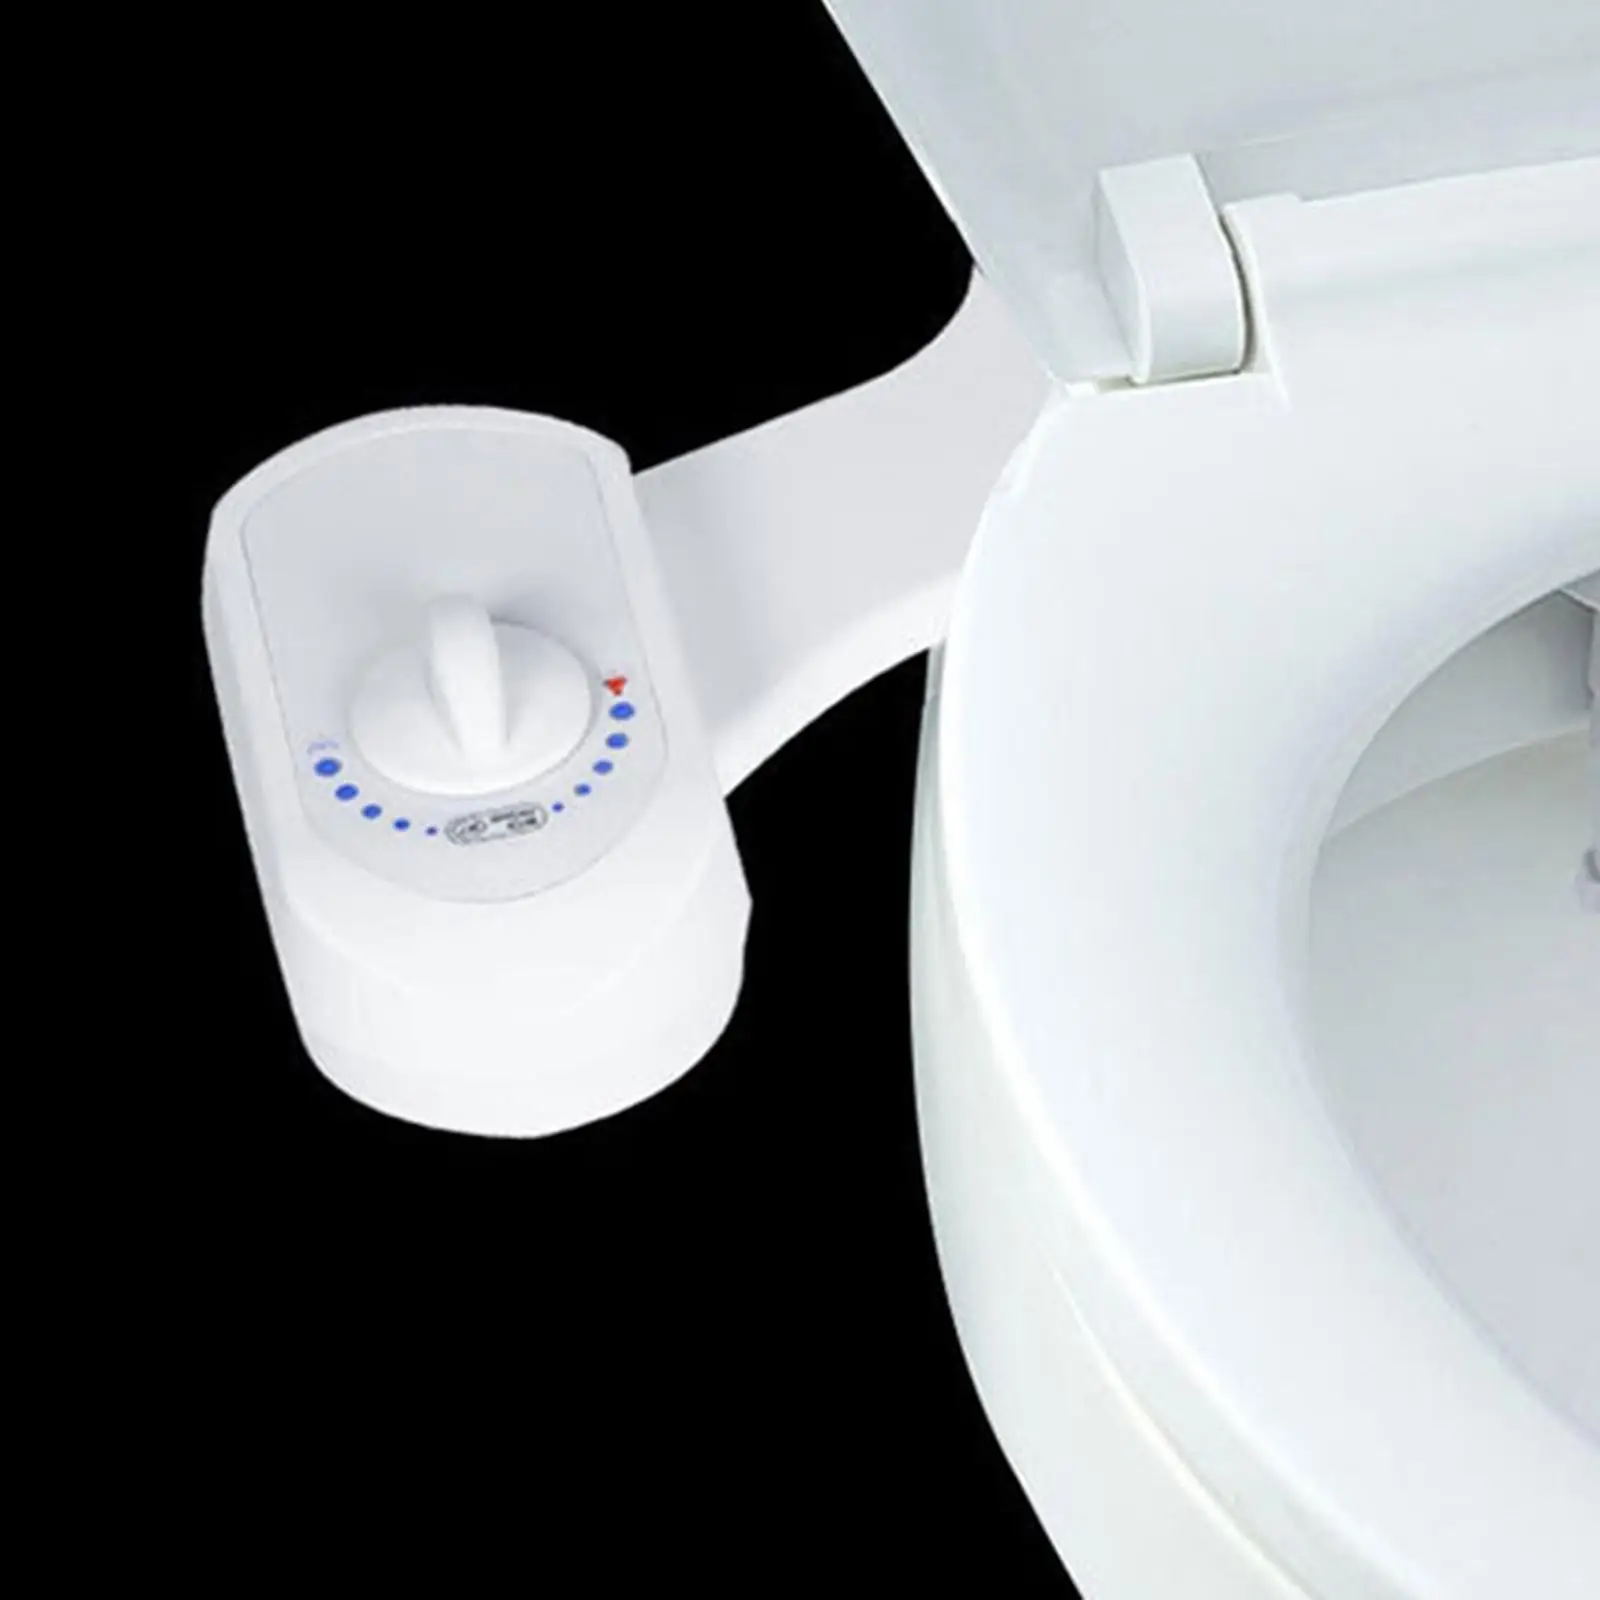 Bidet Toilet Seat Attachment Washing to Install Adjustable Water Pressure Water Temperature Adjustment for Bathroom